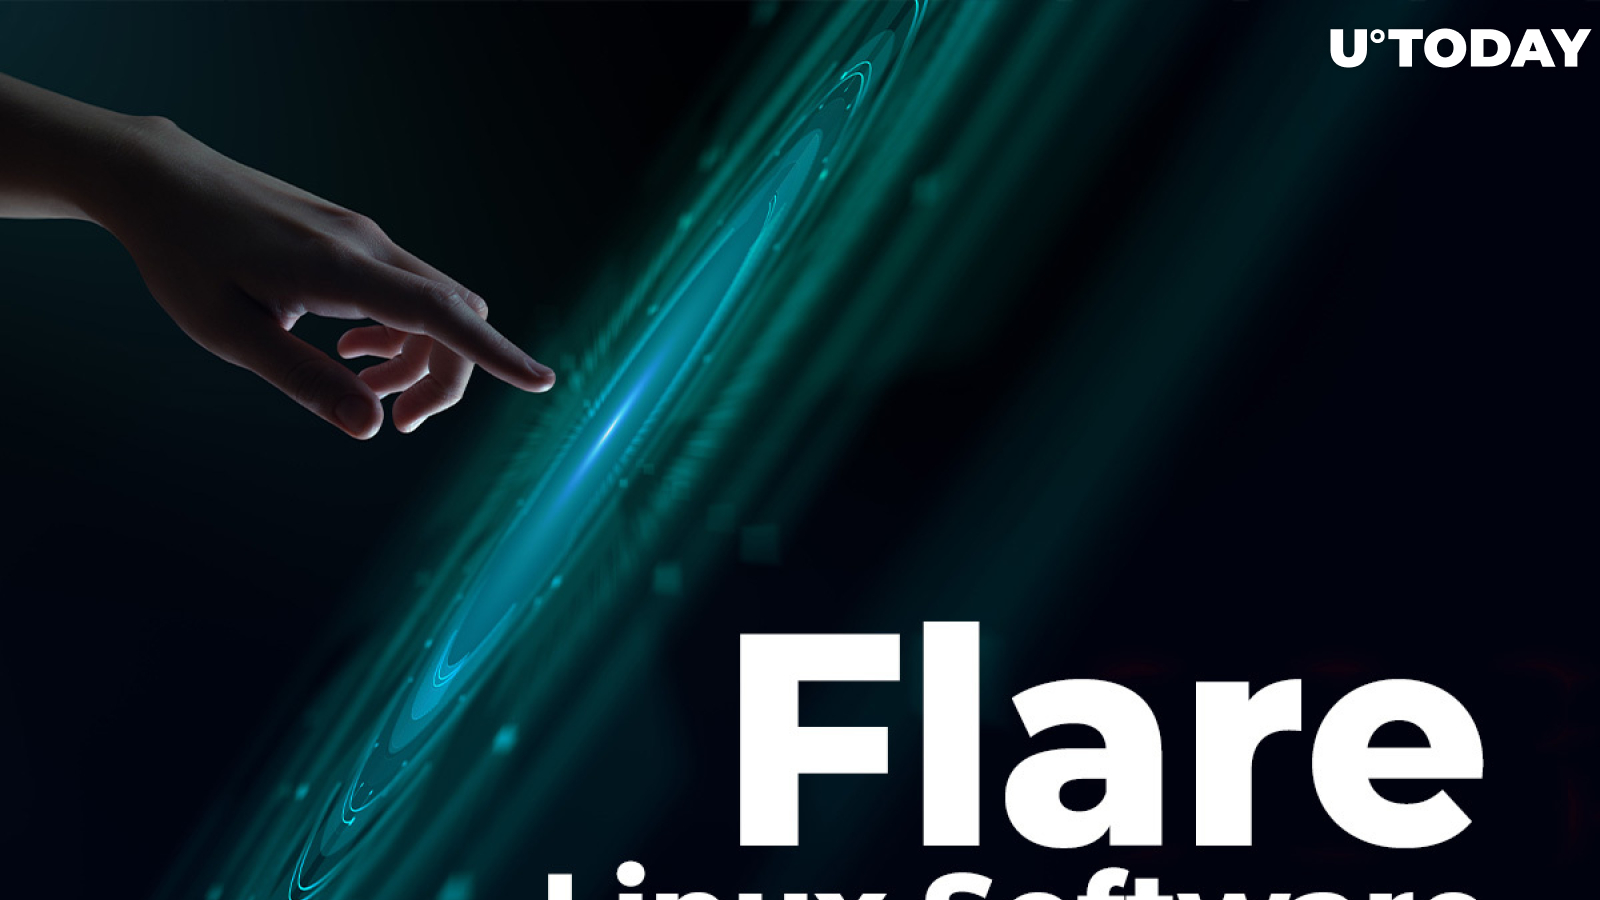 Flare for Linux to Be Launched in Beta Next Week: Details